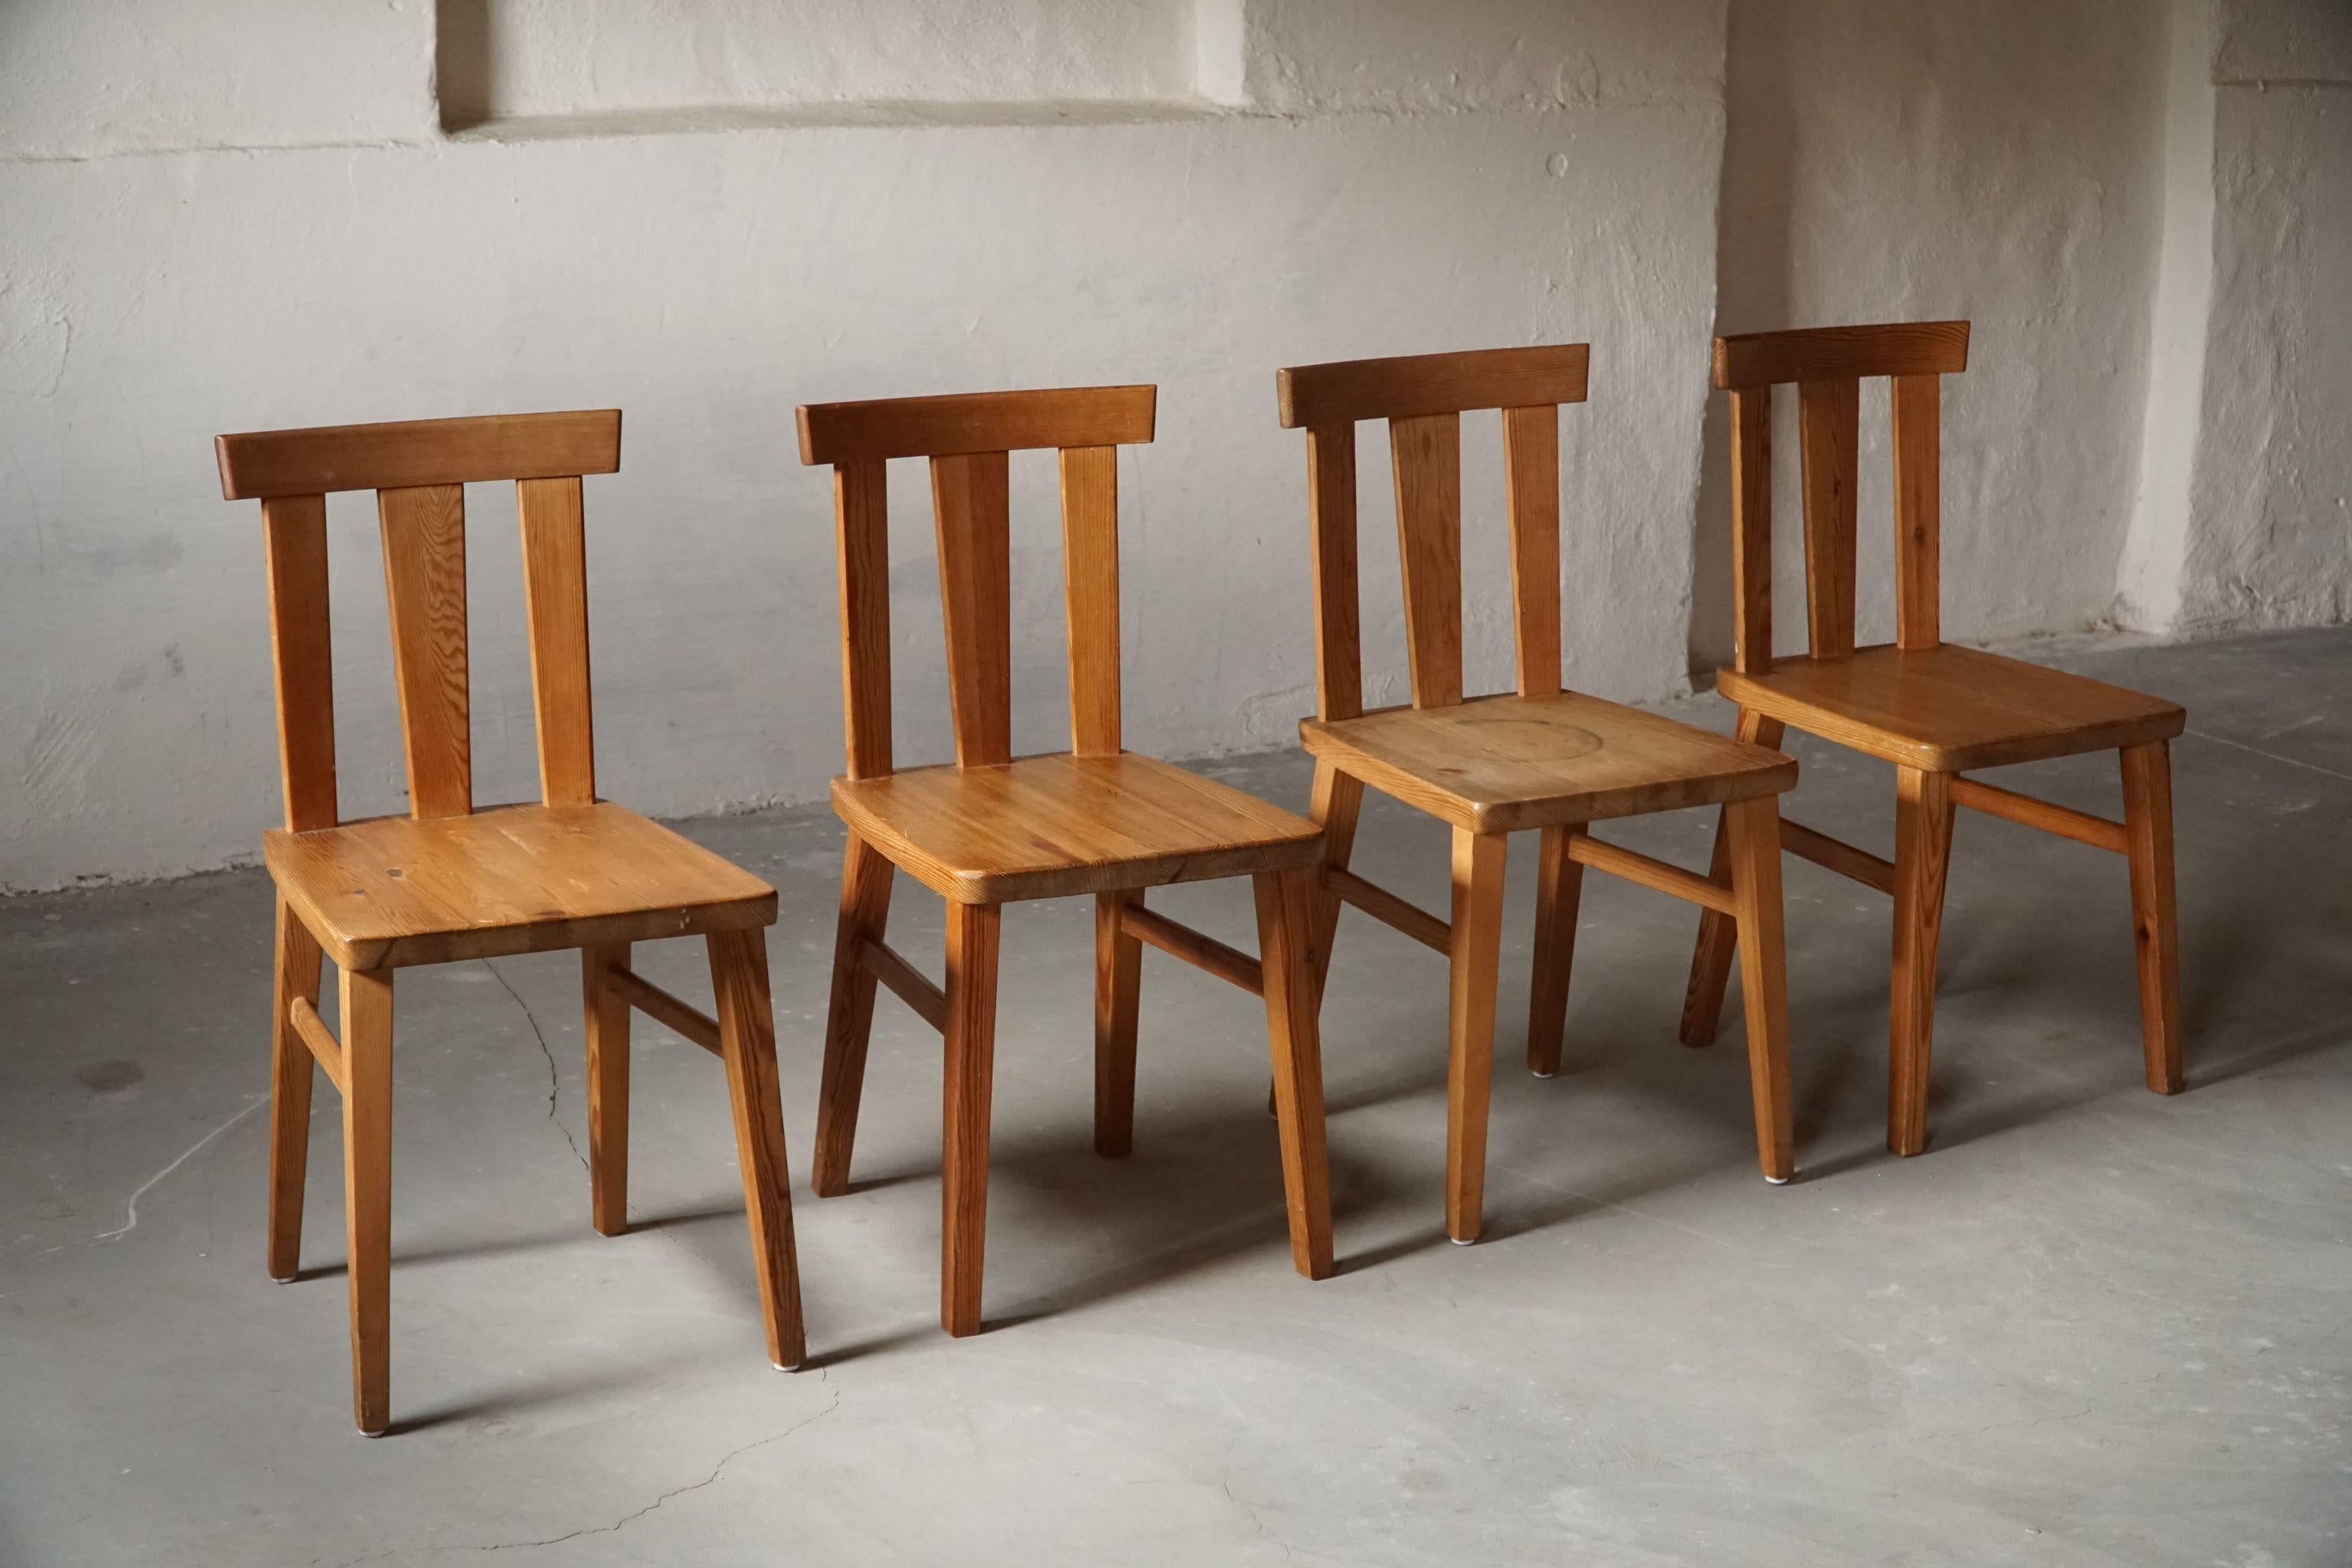 Set of 4 Swedish Modern Chairs in Solid Pine, Axel Einar Hjorth Style, 1930s In Good Condition For Sale In Odense, DK